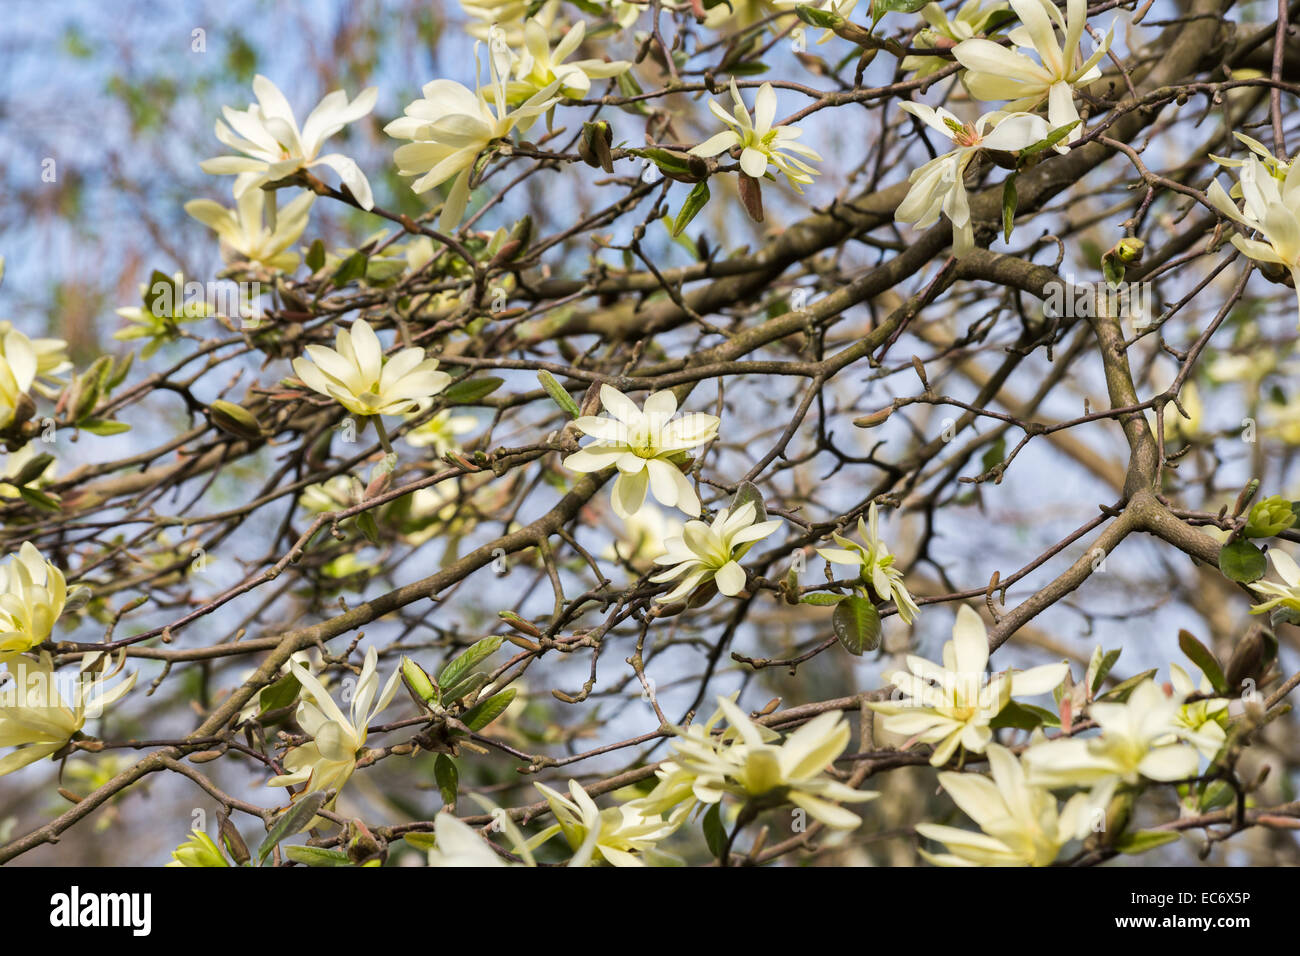 Creamy yellow spring flowering magnolia 'Gold Star' with stellata type flowers in bloom in April in springtime Stock Photo